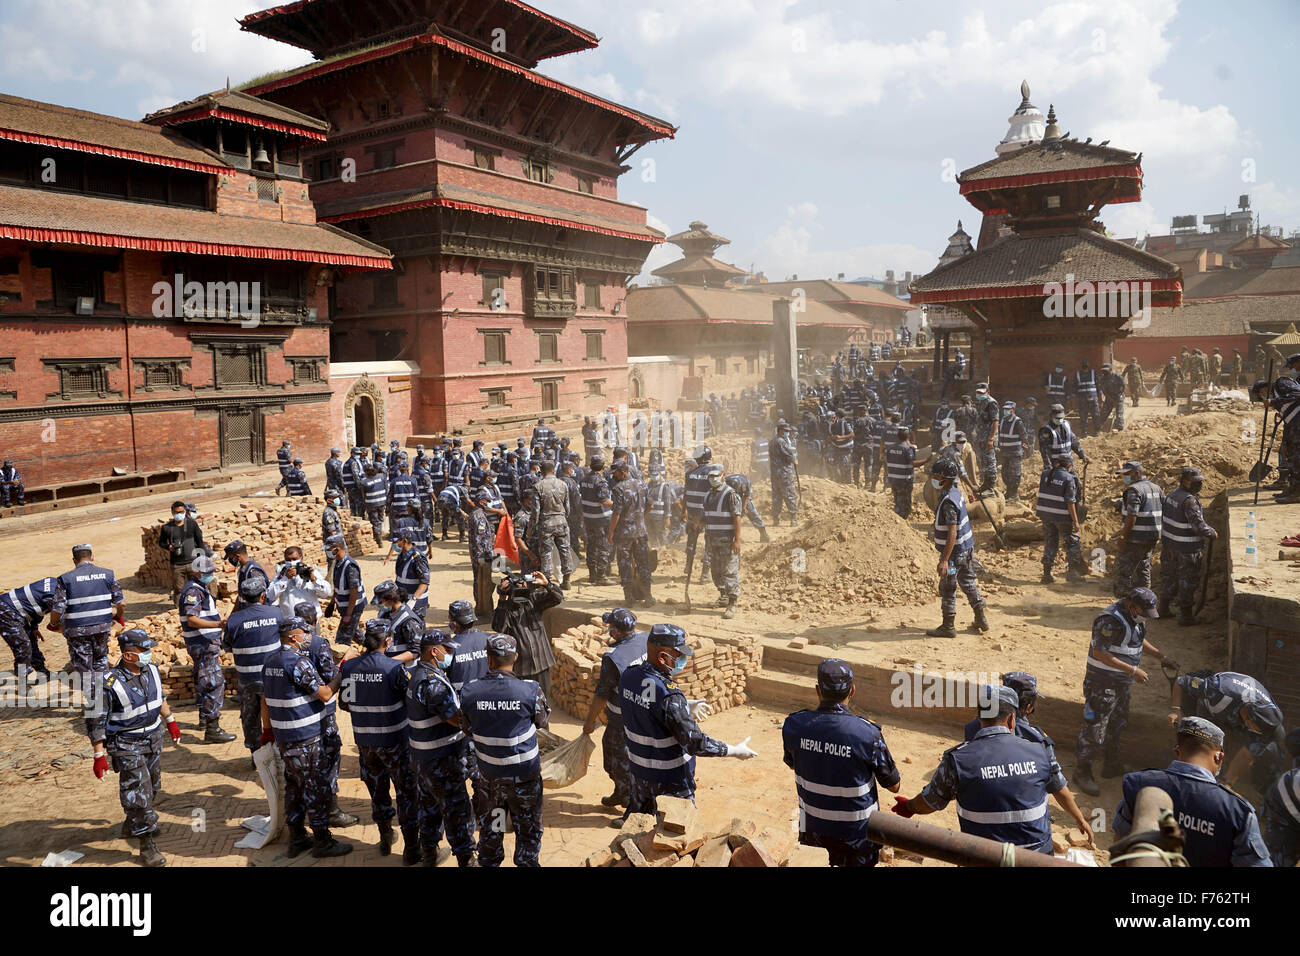 Police personnel clearing debris, krishna temple, nepal, asia Stock Photo